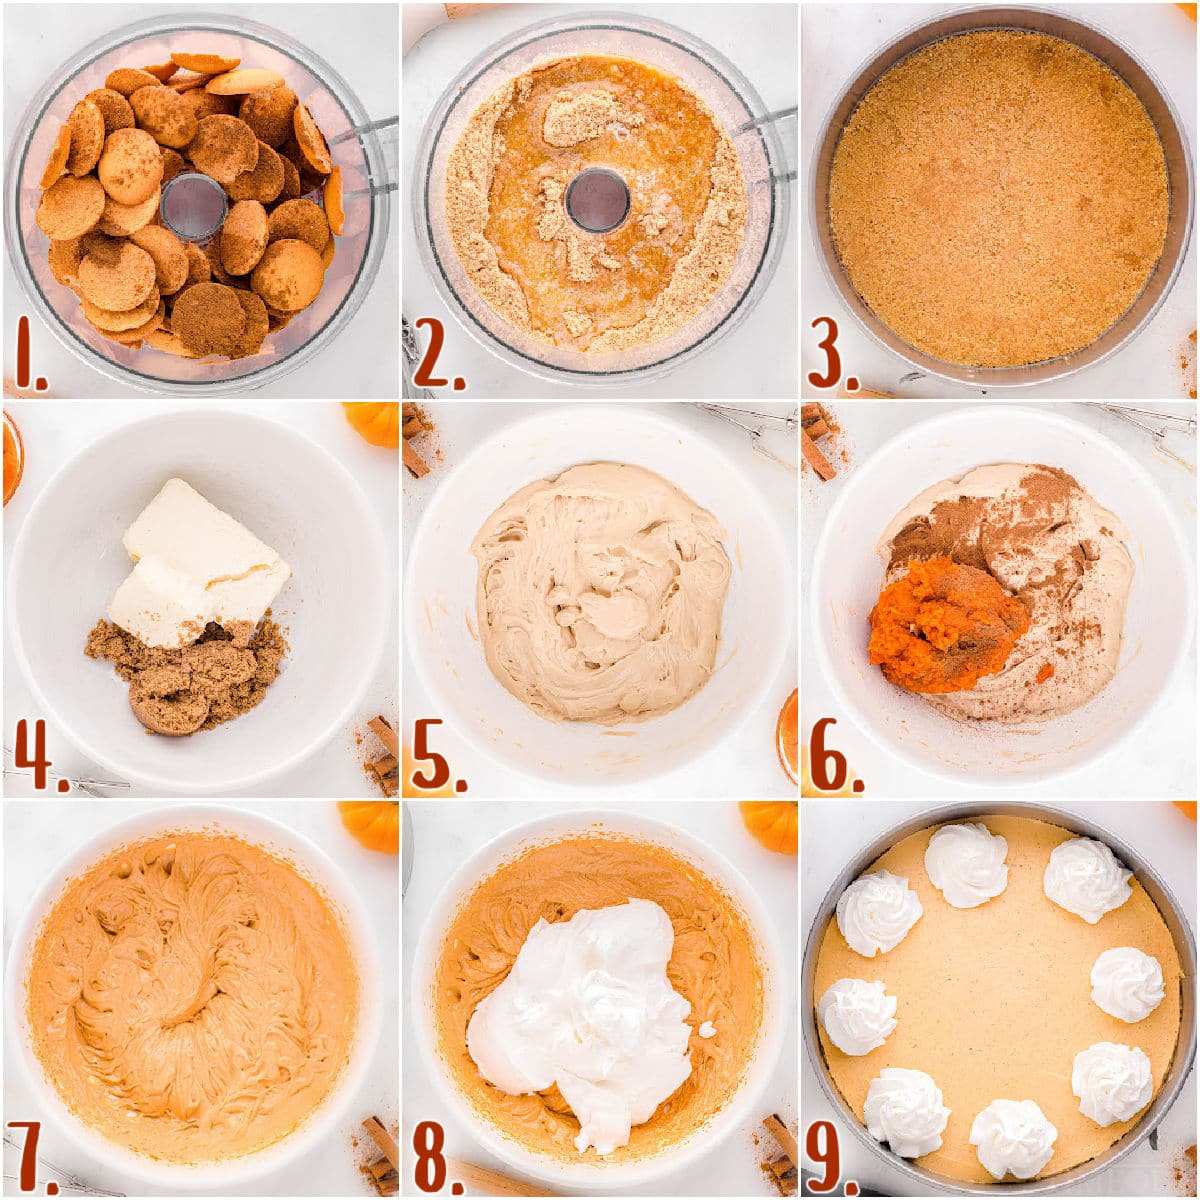 nine image collage showing how to make a no bake pumpkin cheesecake step by step including the crust.